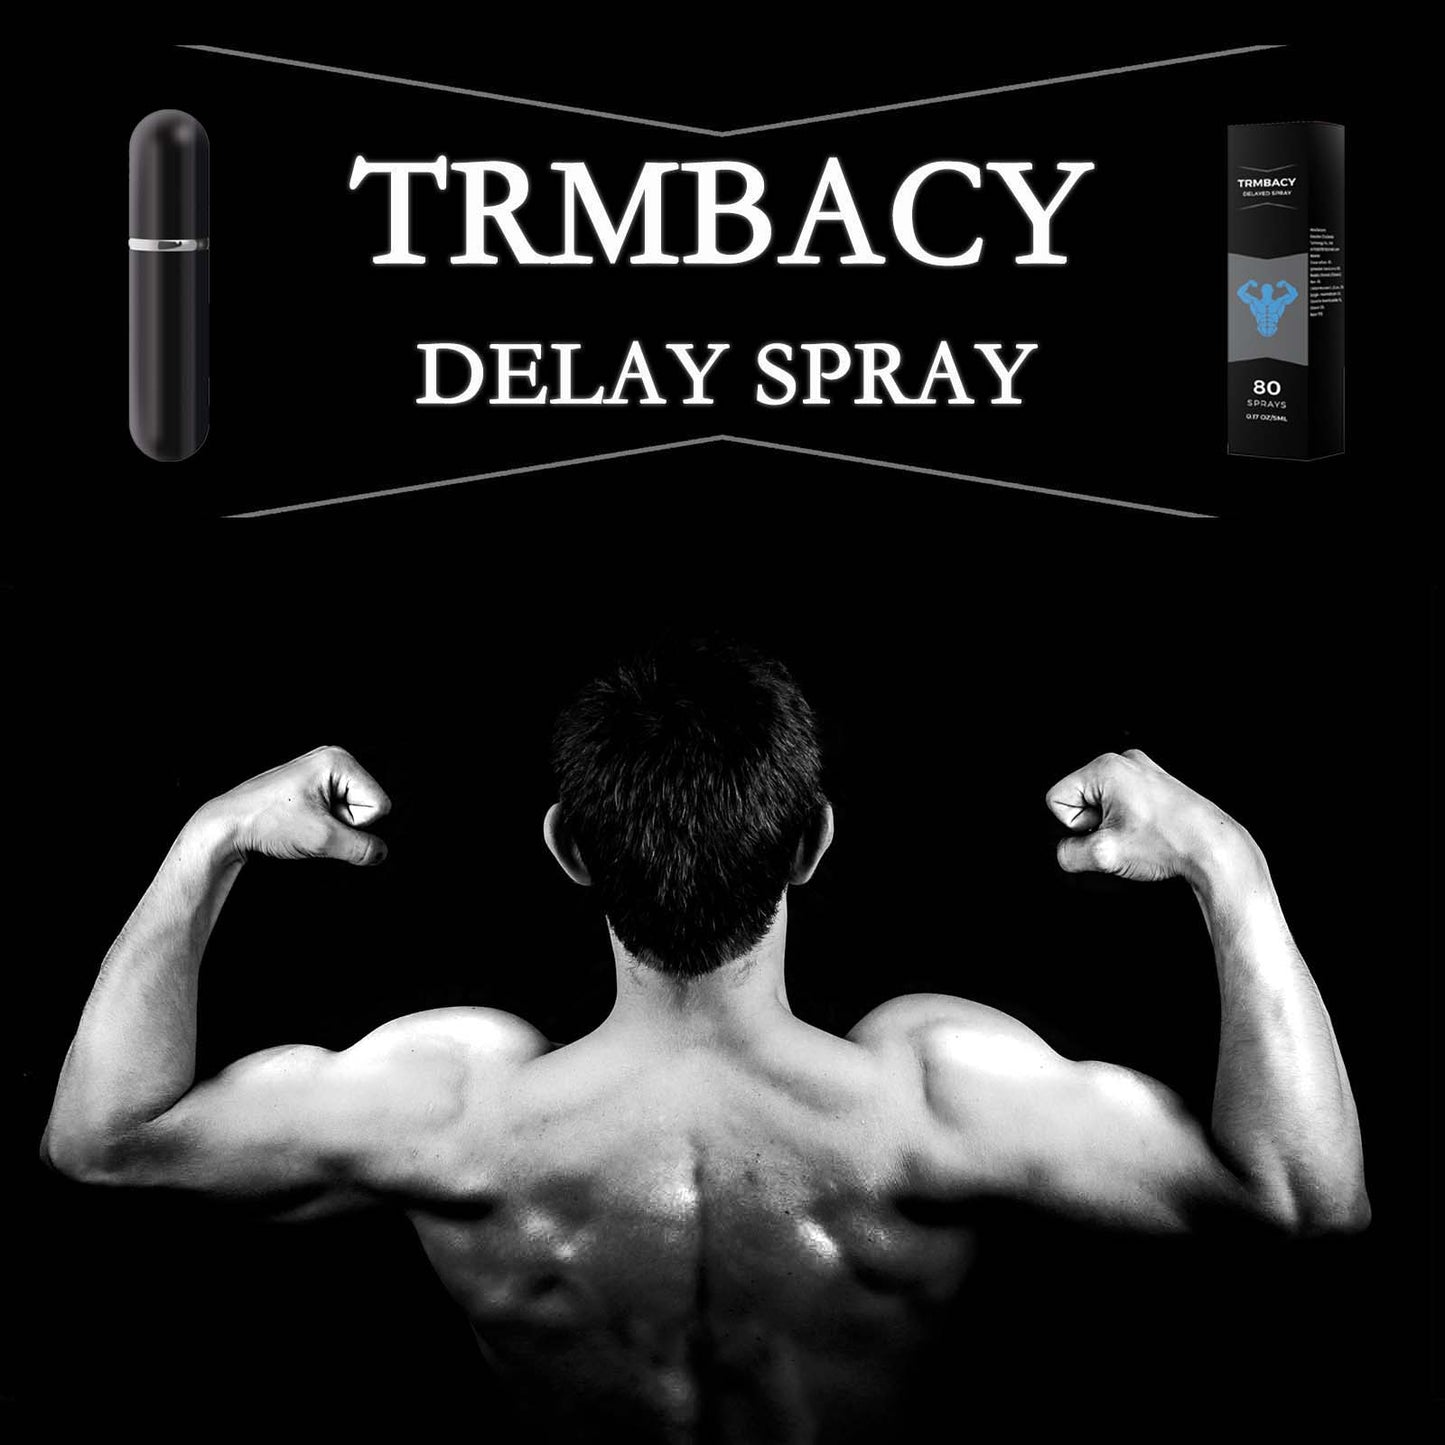 XSSpray Men's Desensitization Delay Spray, Clinically Proven to Help You Last Longer in Bed - Extended Men's Orgasm, 5ml （2pcs）